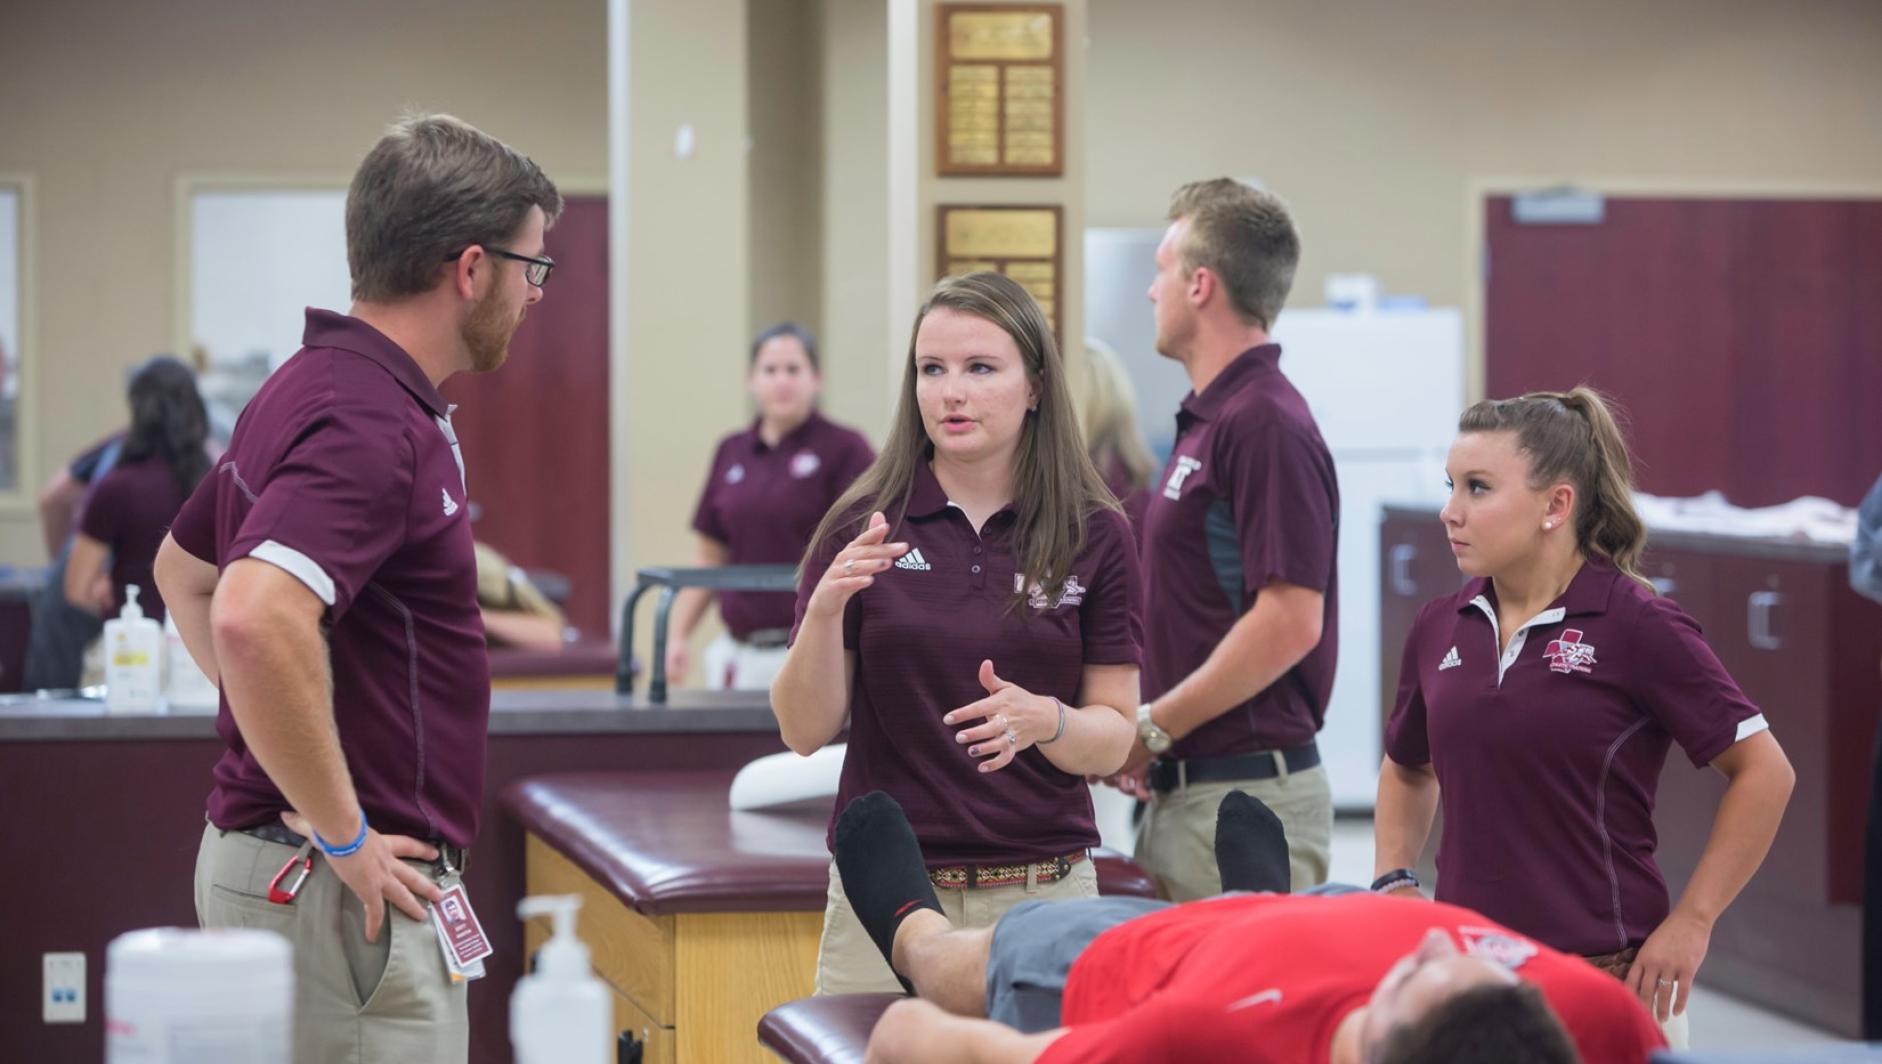 Athletic training students have a discussion about a client in the athletic training facility.